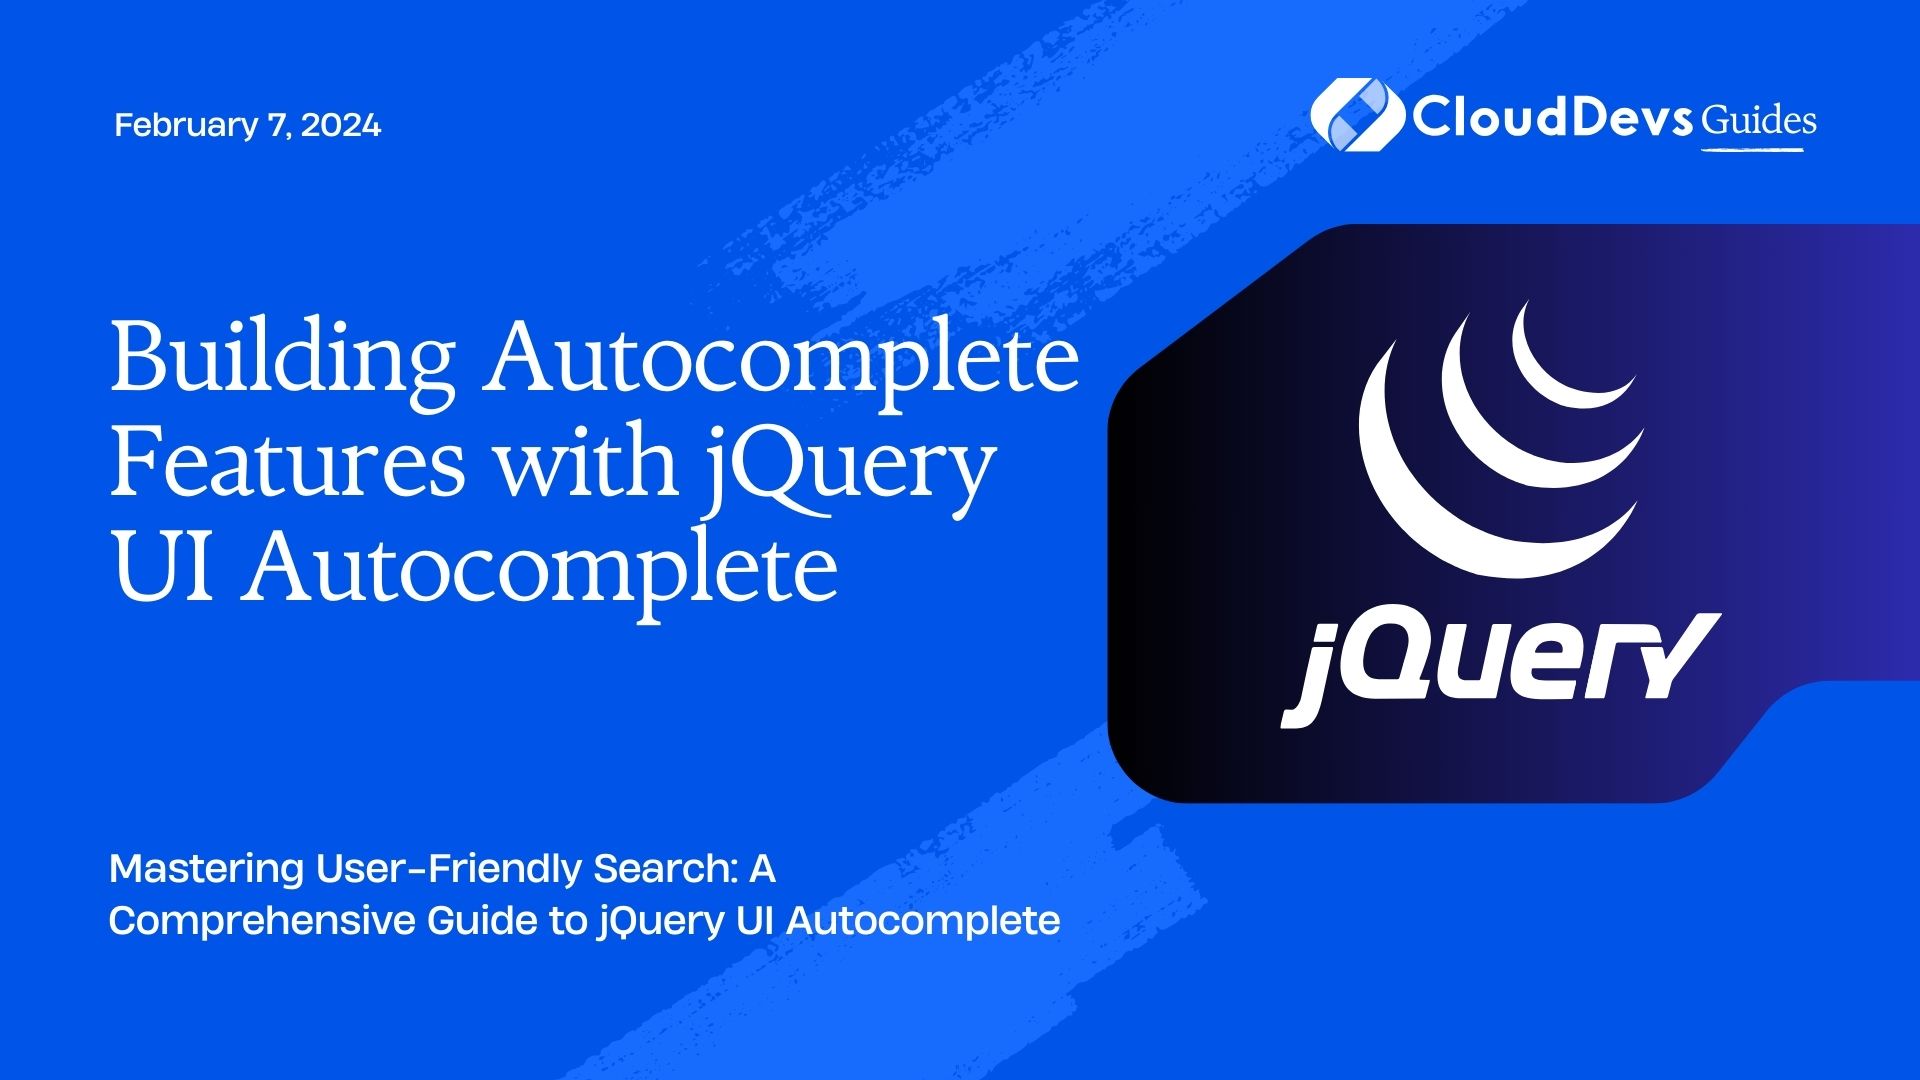 Building Autocomplete Features with jQuery UI Autocomplete